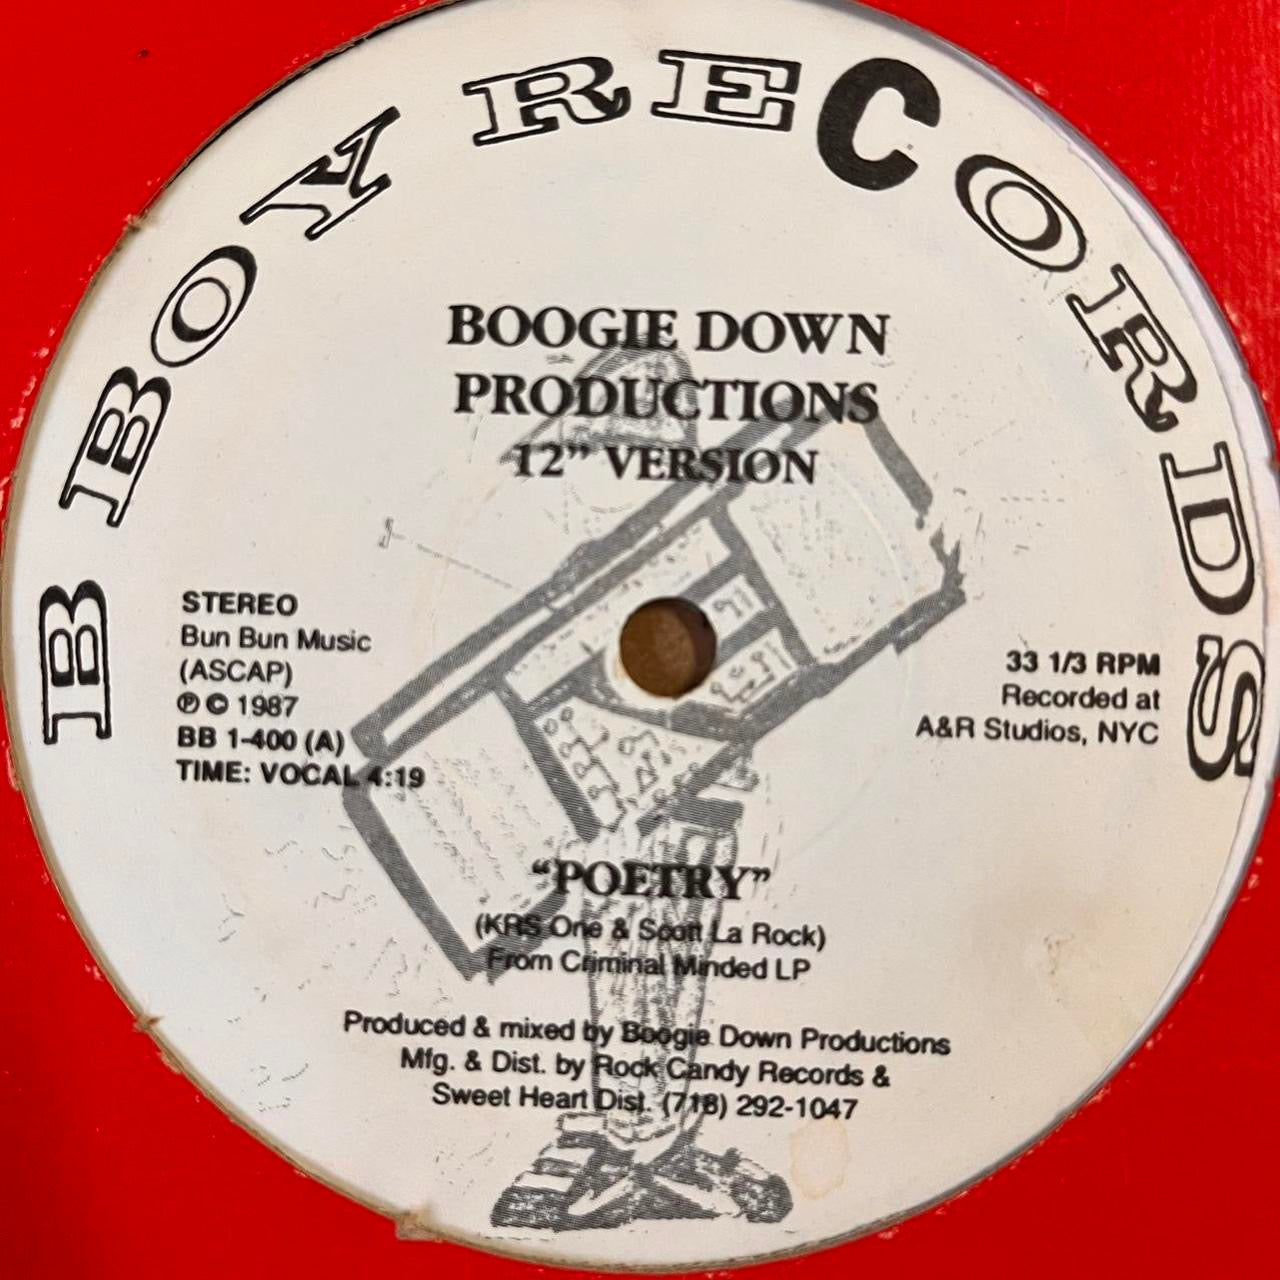 Boogie Down Productions “Poetry” / “Elementary” 2 Track 12inch Vinyl Single